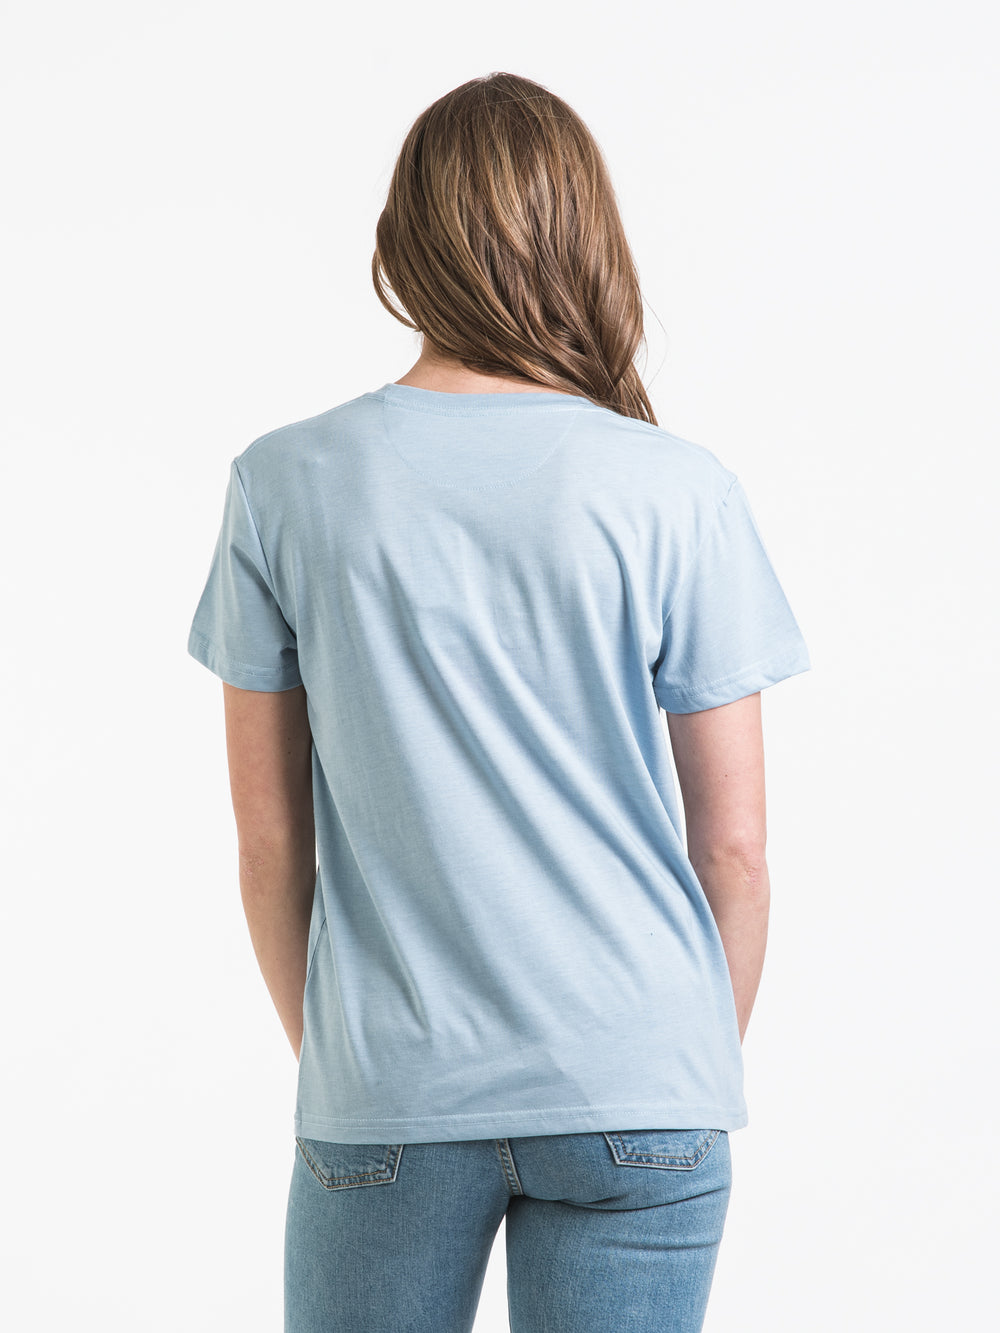 TENTREE TO THE MOUNTAINS T-SHIRT - CLEARANCE